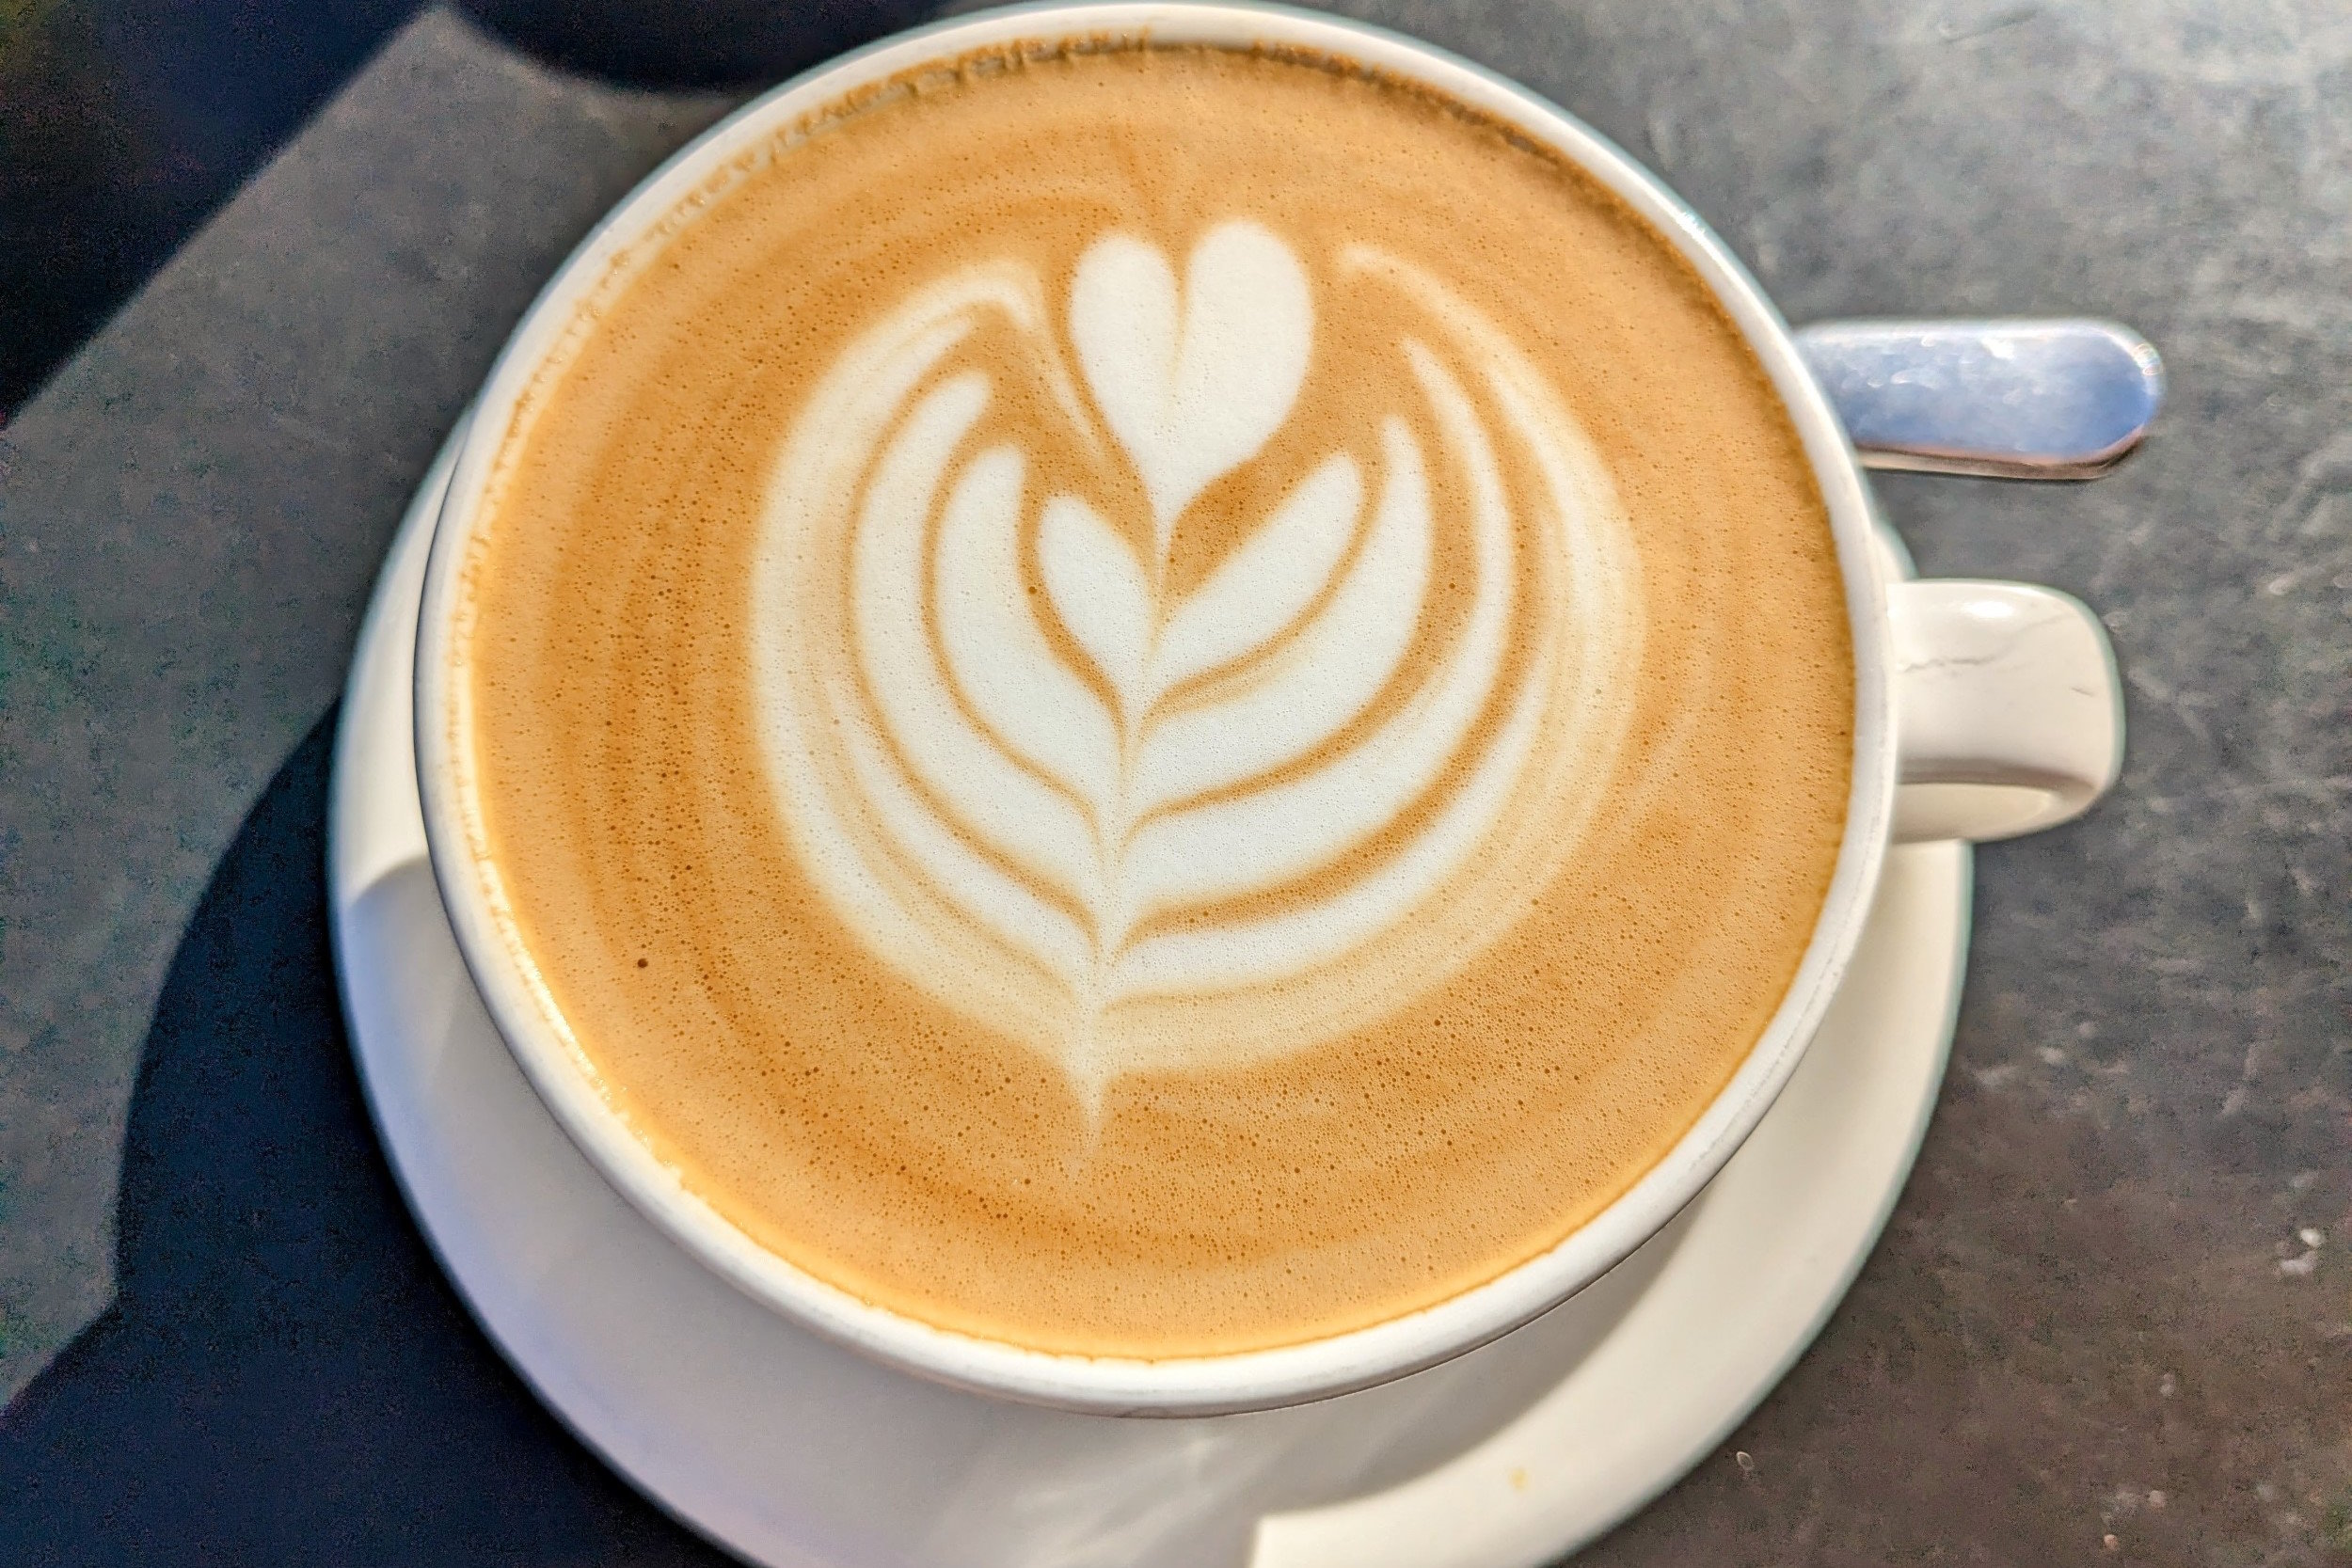 Overhead view of coffee cup with latte art on a metal table